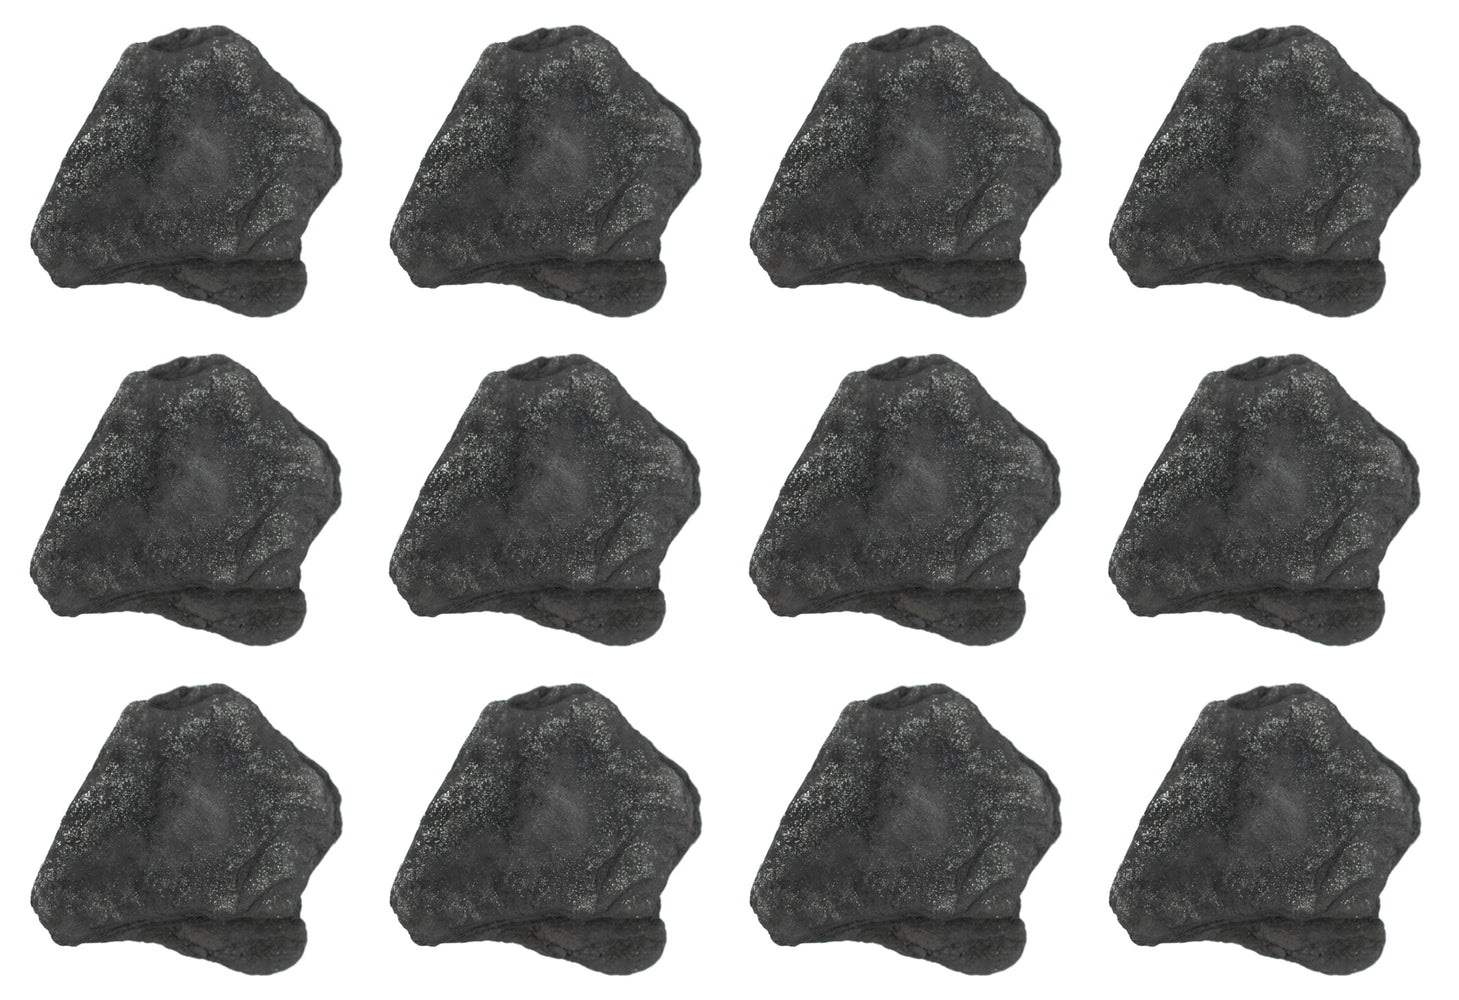 12 Pack - Raw Anthracite Coal, Metamorphic Rock Specimens - Approx. 1"